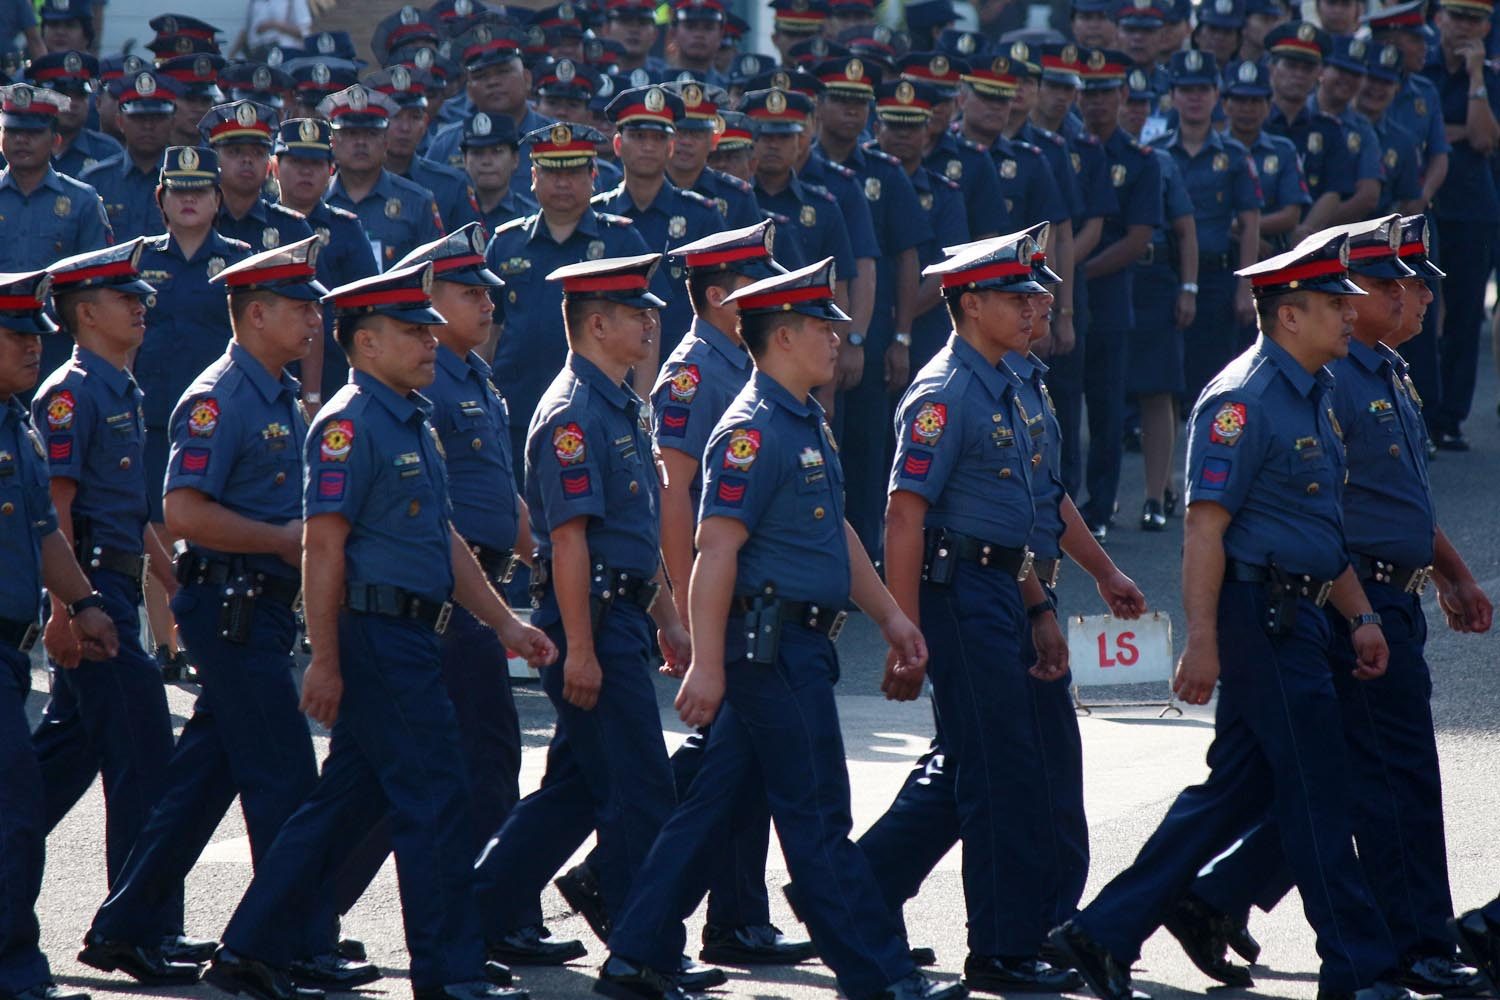 PNP says 125 cops punished for drug war-related offenses